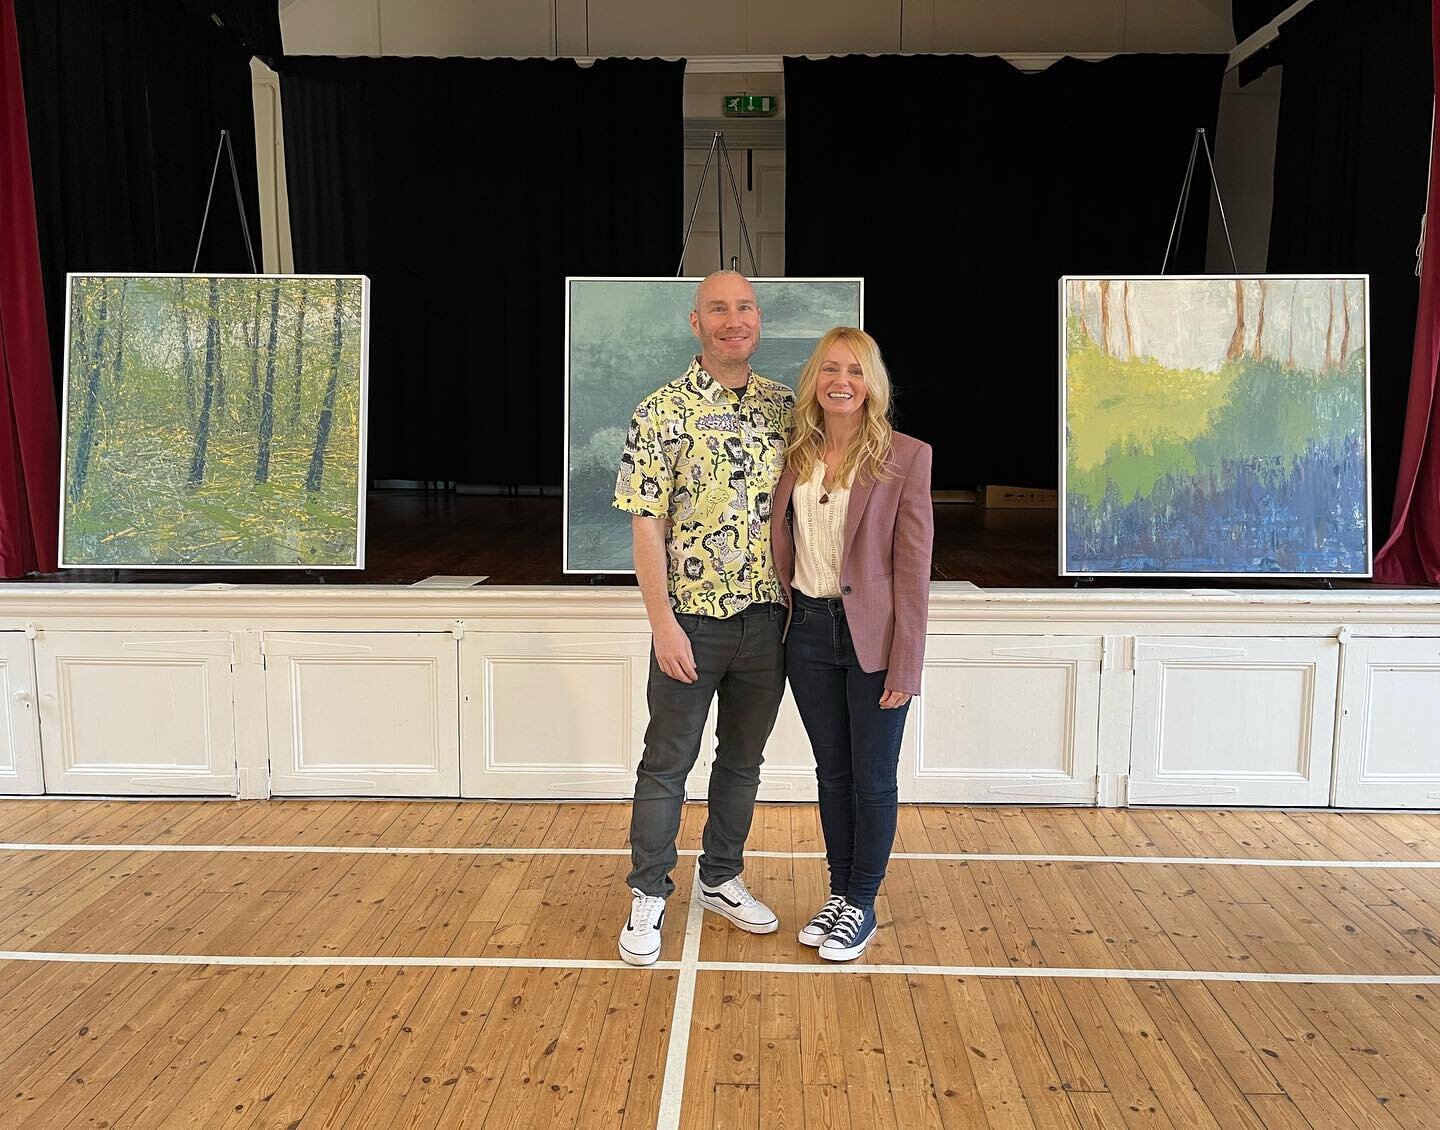 We would like to say a huge Thank You to our friends, family and neighbours that helped us set up and dismantle the art exhibition, also those that leant easels or shared social media posts. It would not have been possible without you all 👍
Really, 